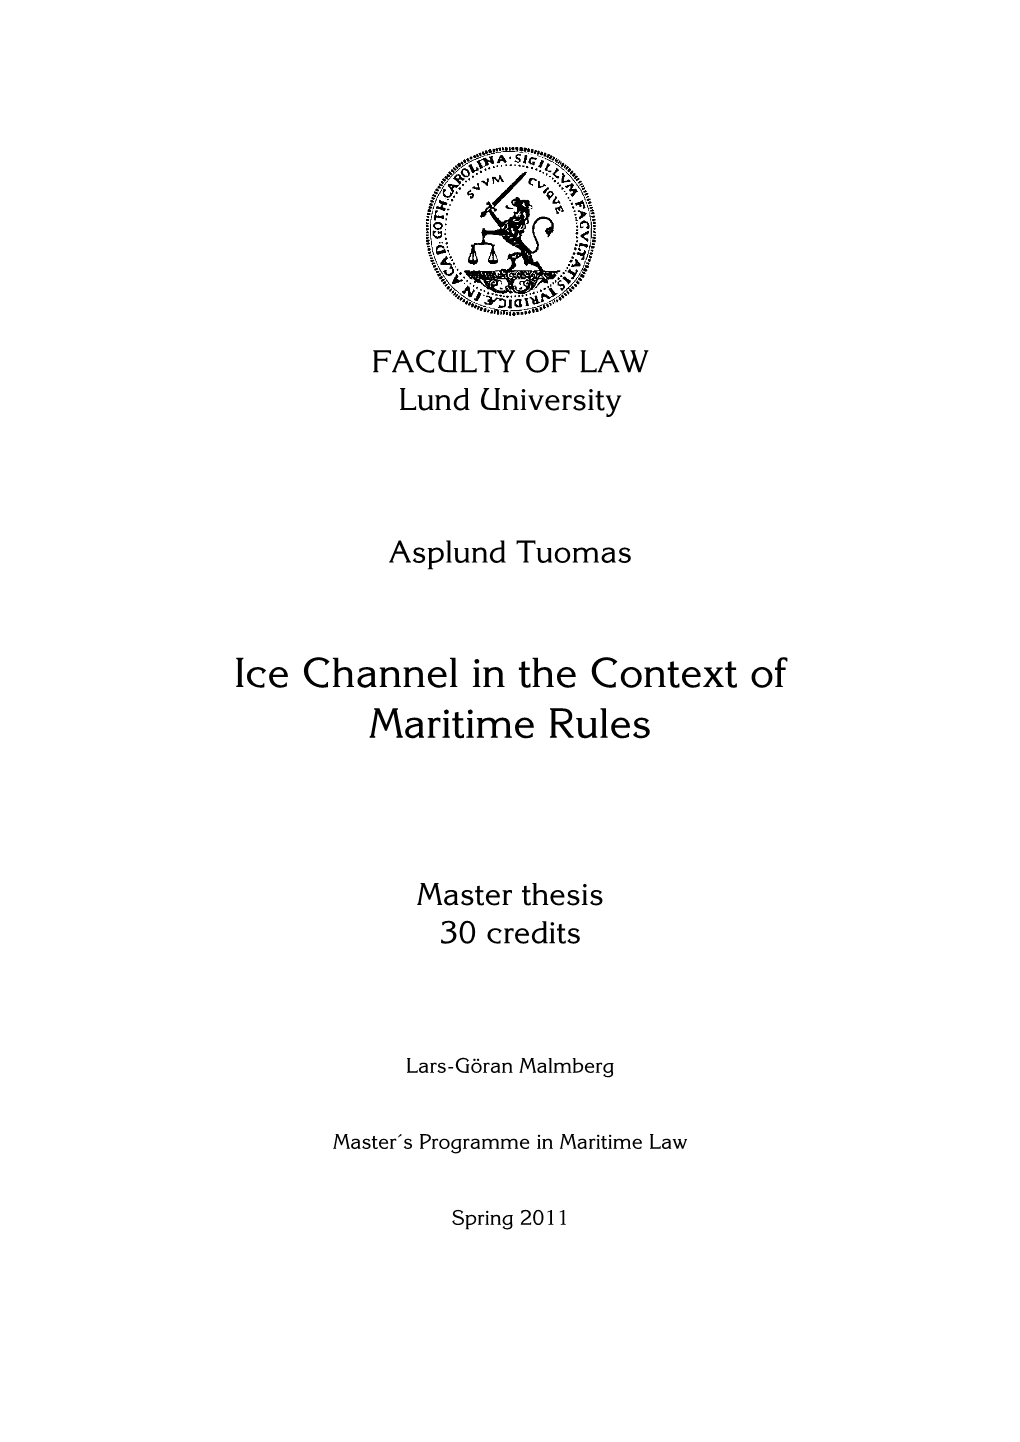 Ice Channel in the Context of Maritime Rules